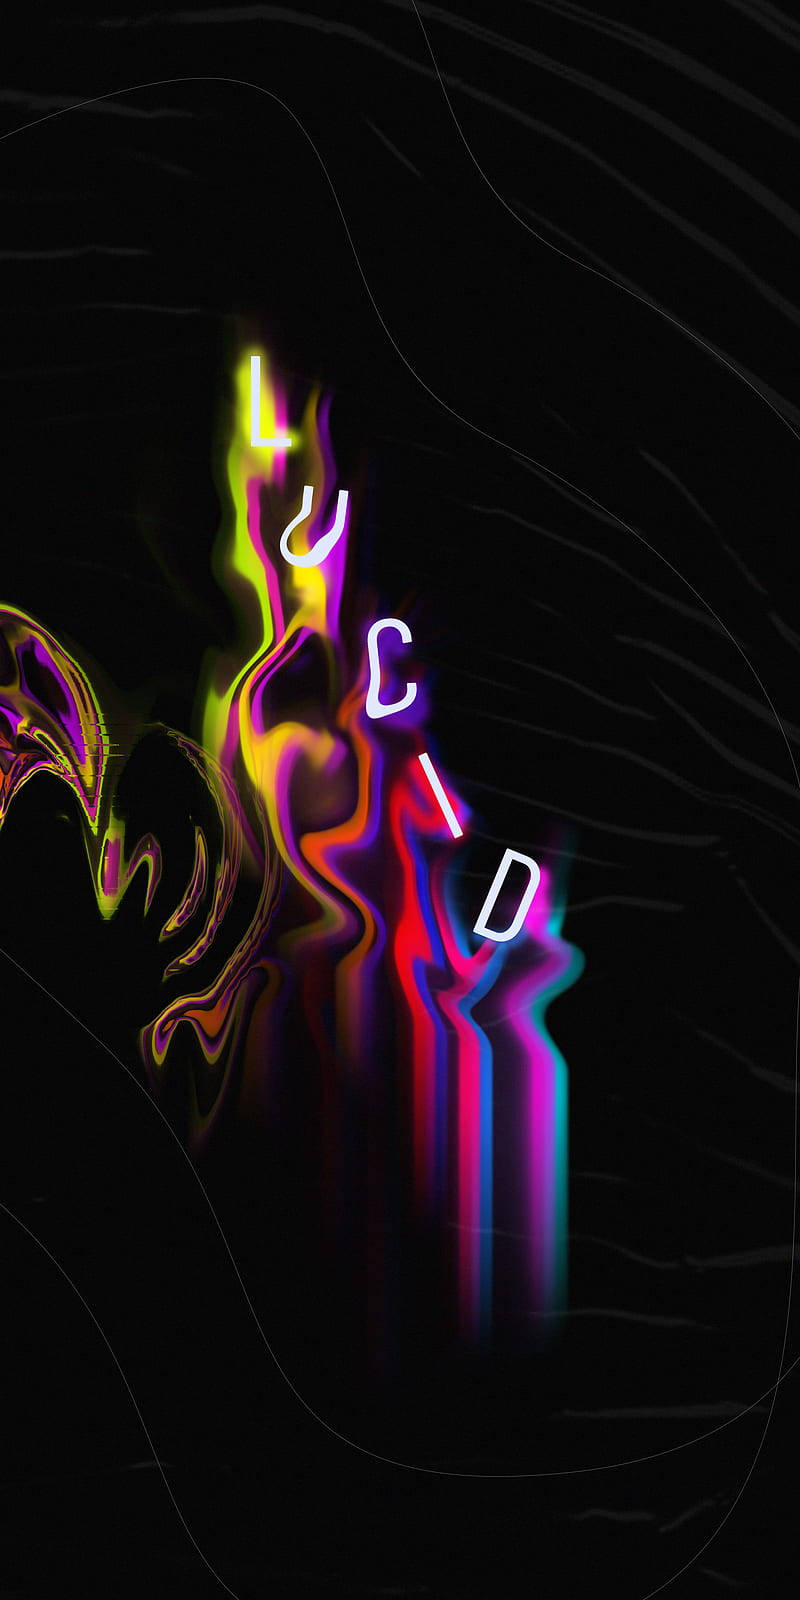 "A captivating display of color and shapes in Lucid's 'Color Meltdown'" Wallpaper